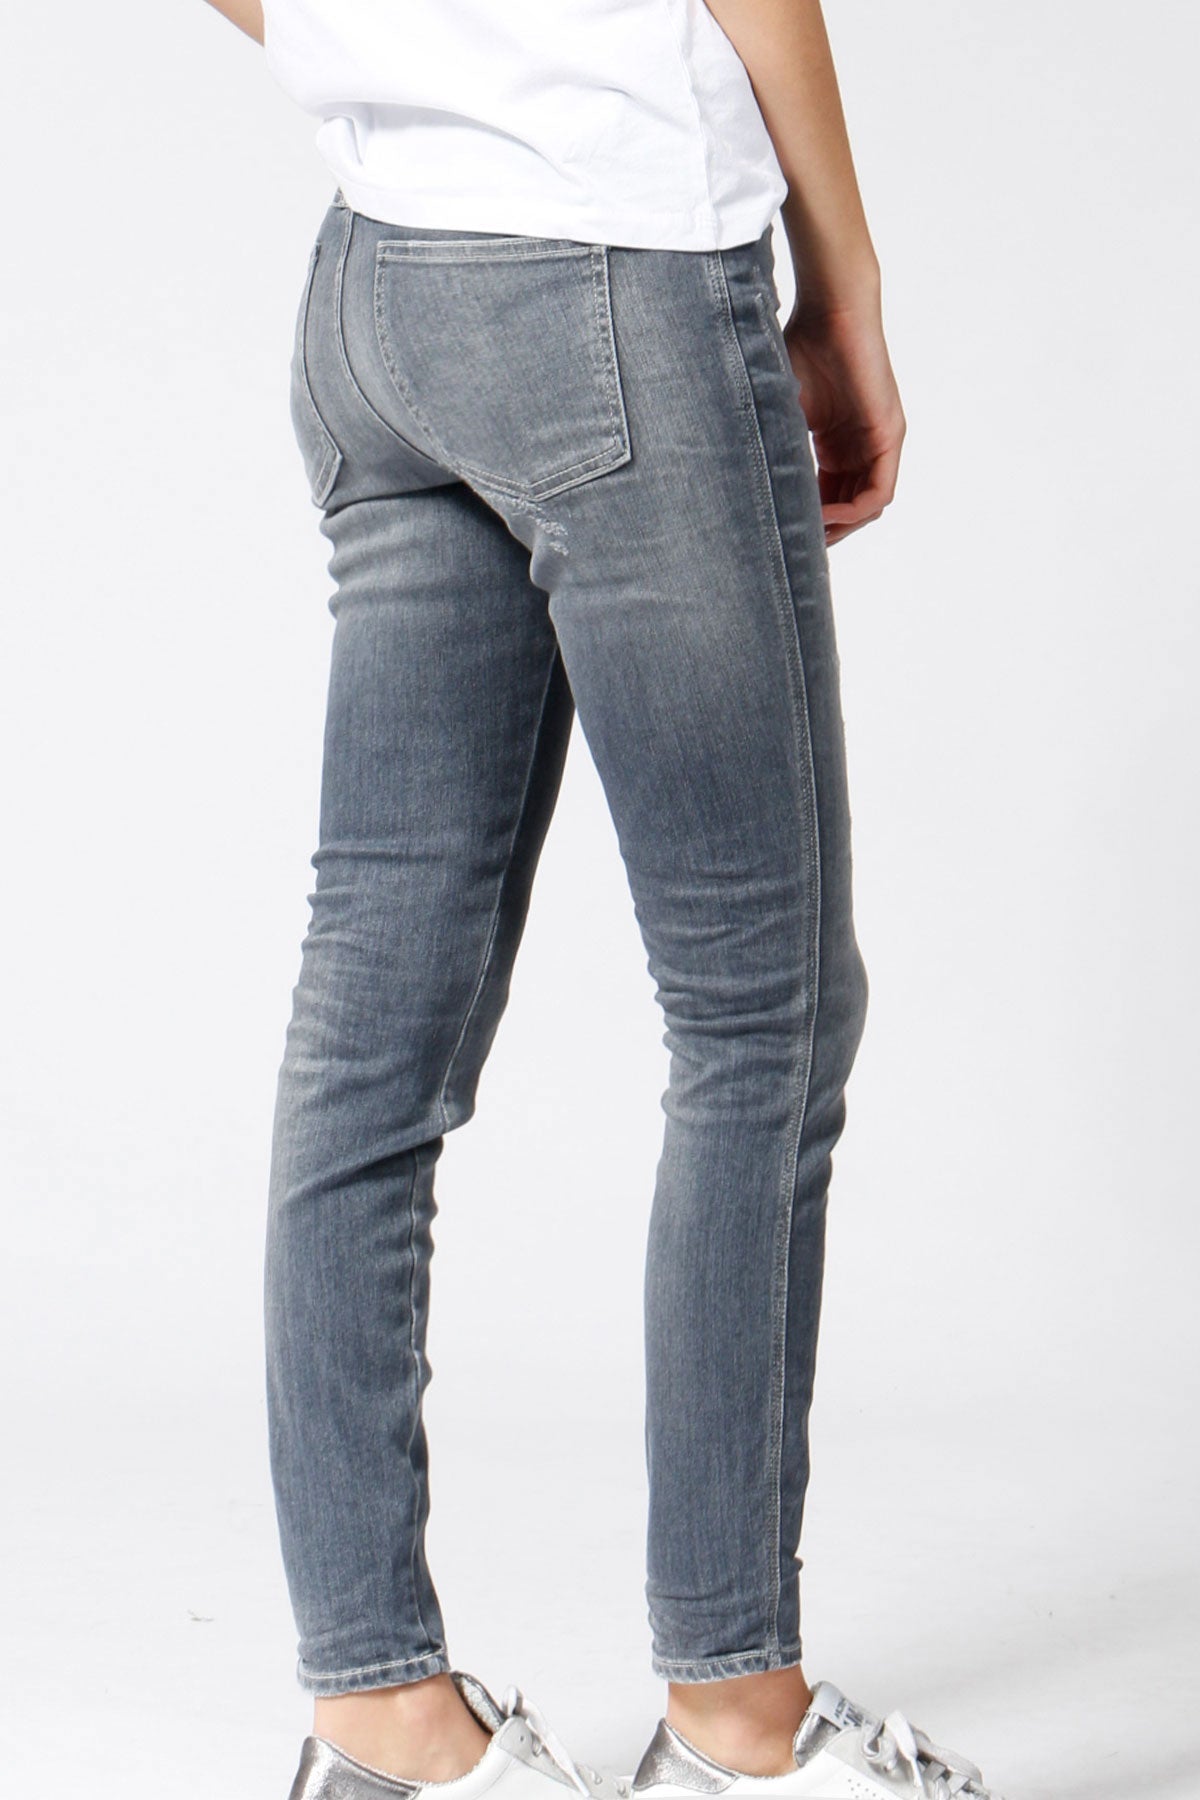 Closed Skinny Pusher Jeans in Mid Grey - Estilo Boutique